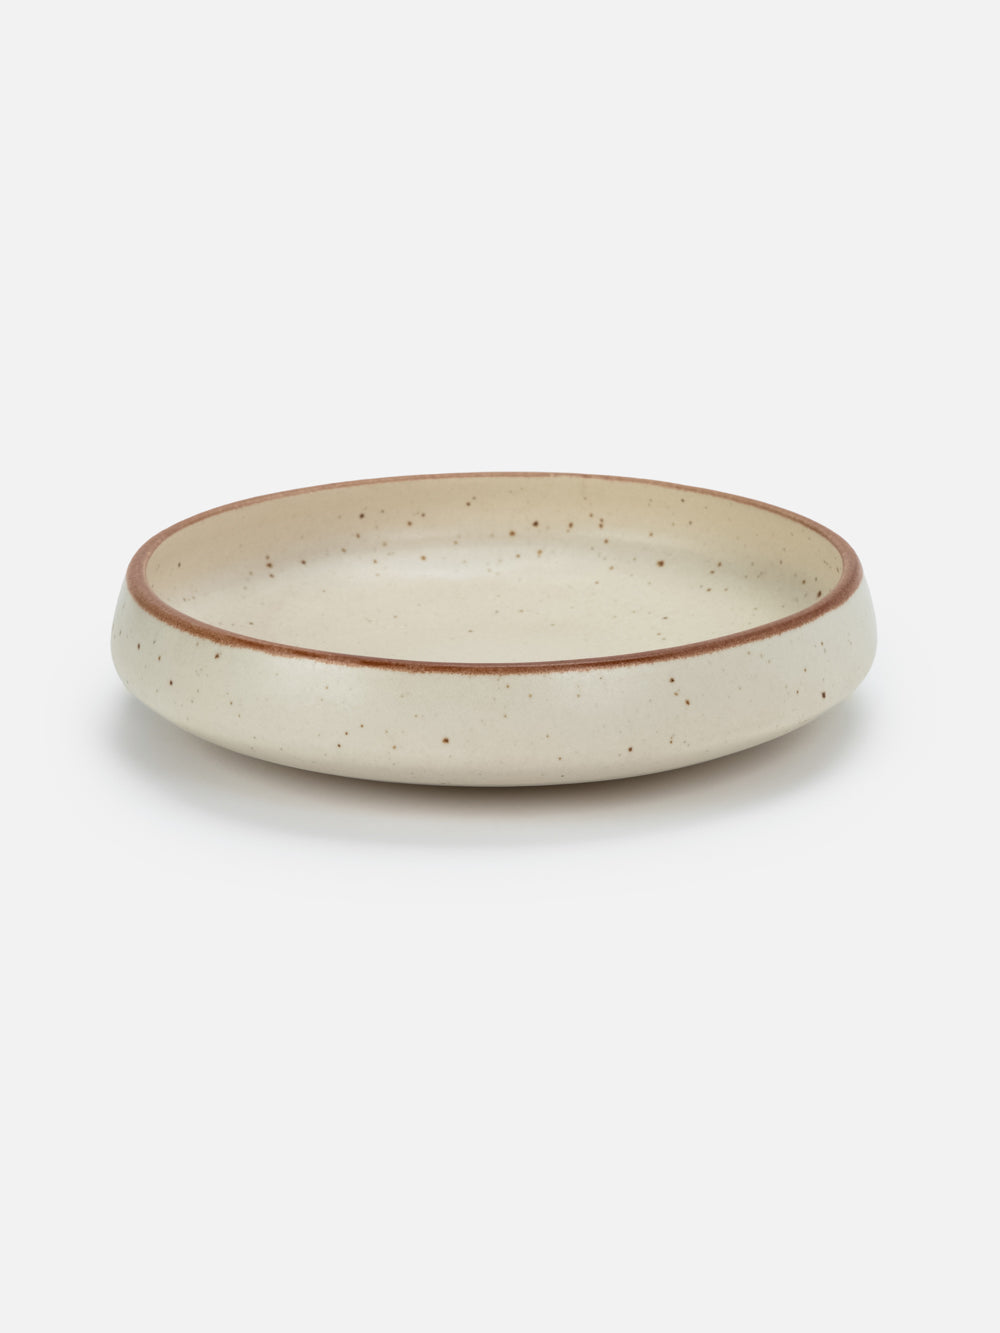 Country Ceramic Serving Bowl